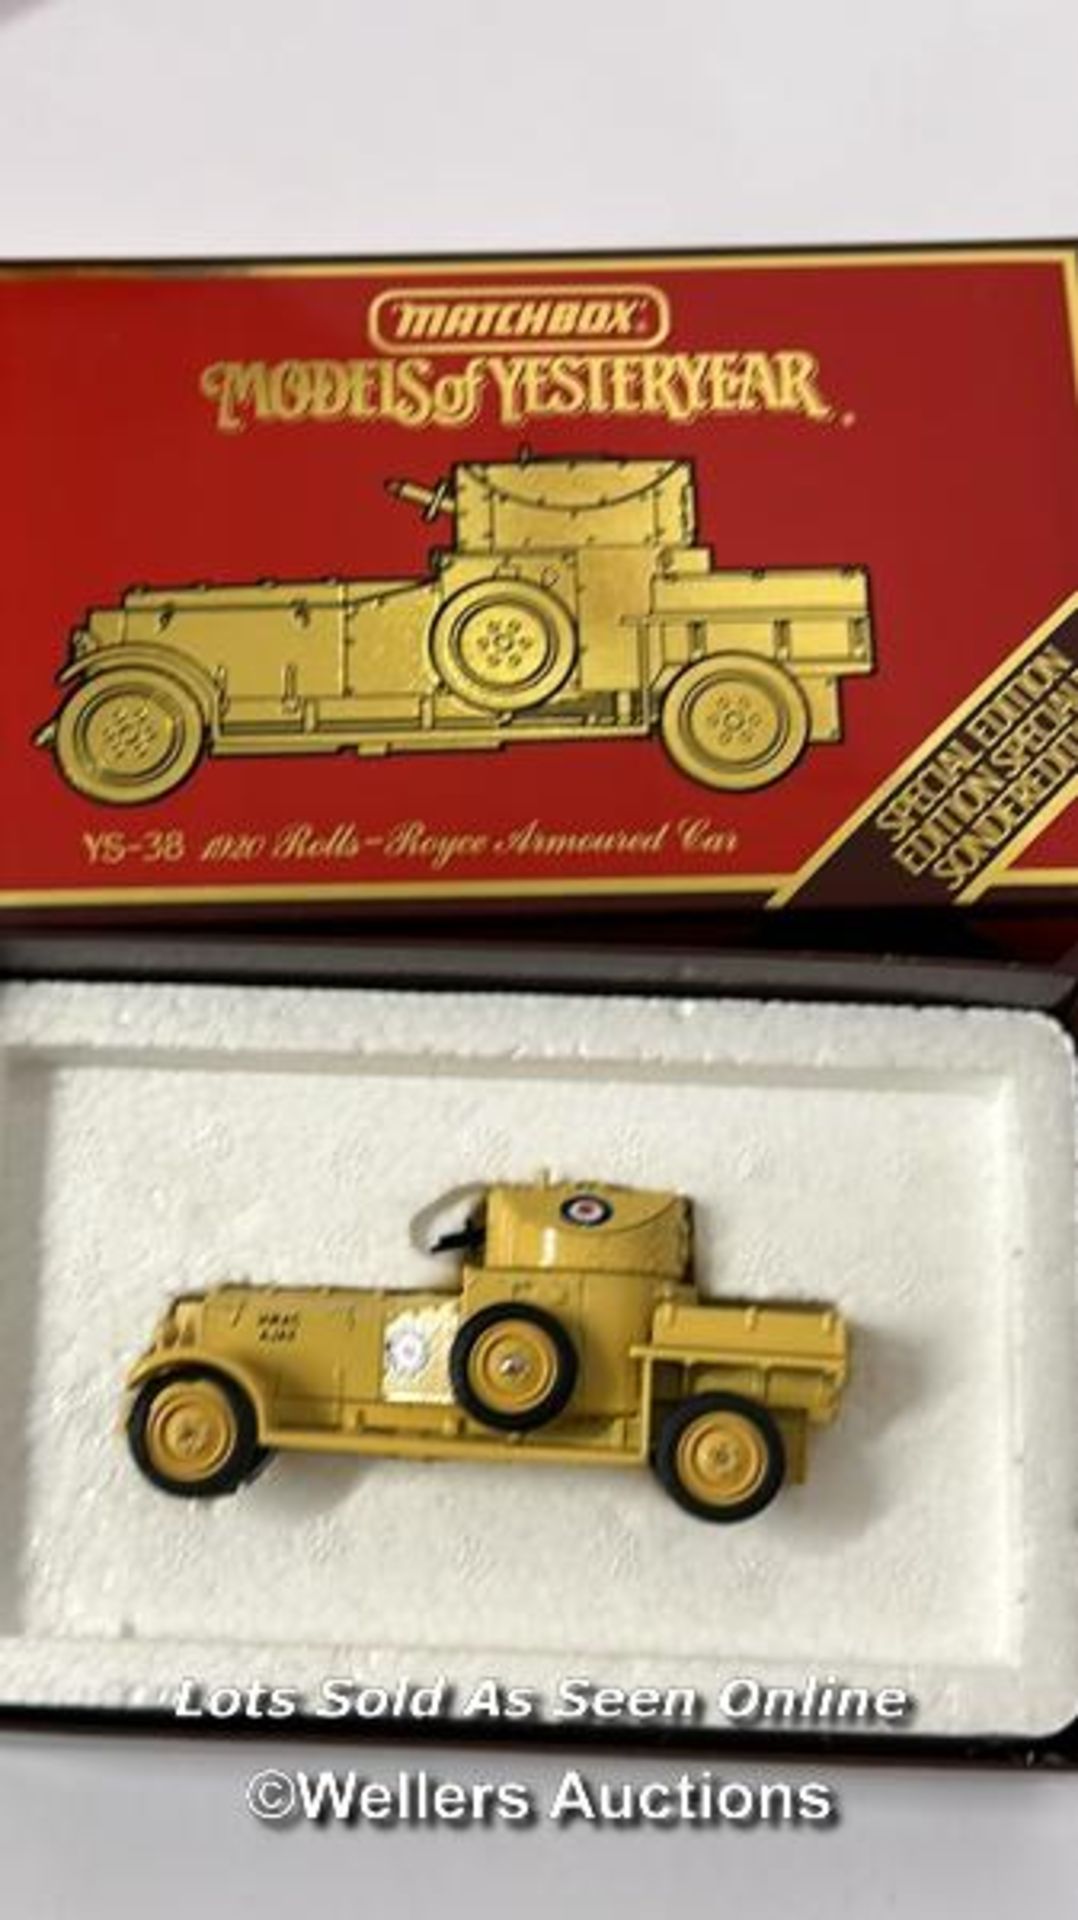 Matchbox Models of Yesteryear 1920 Rolls-Royce Armoured Car YS-38, Limited edition, boxed - Bild 3 aus 5